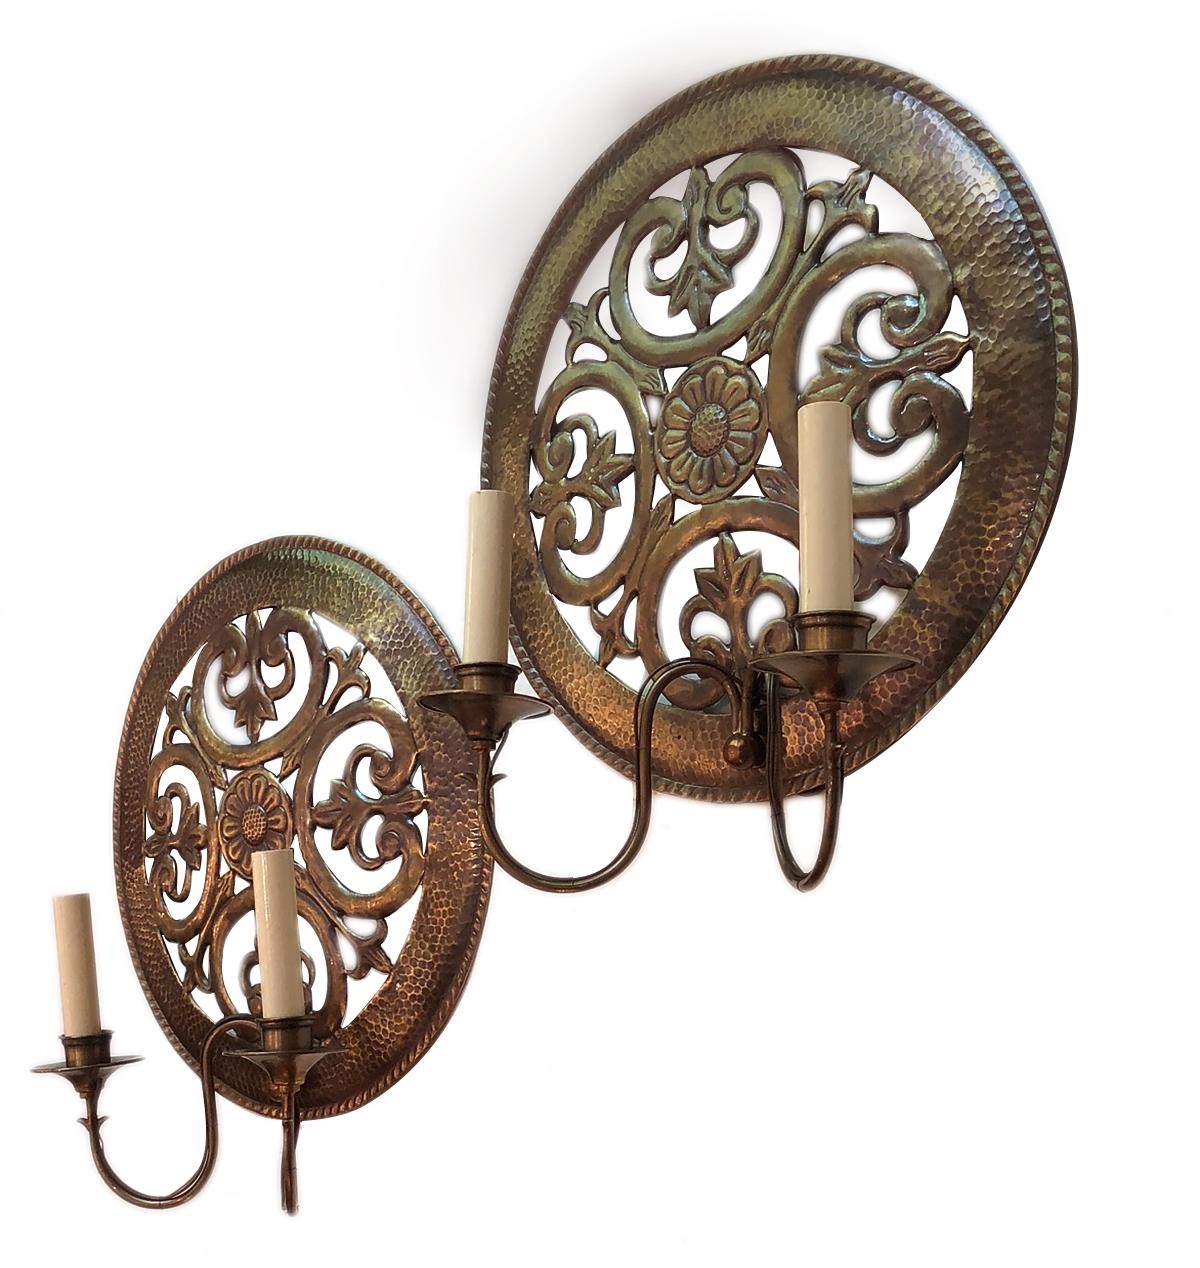 Pair of circa 1940s Italian pierced and hammered sconces with original patina.

Measurements:
Diameter of body 15